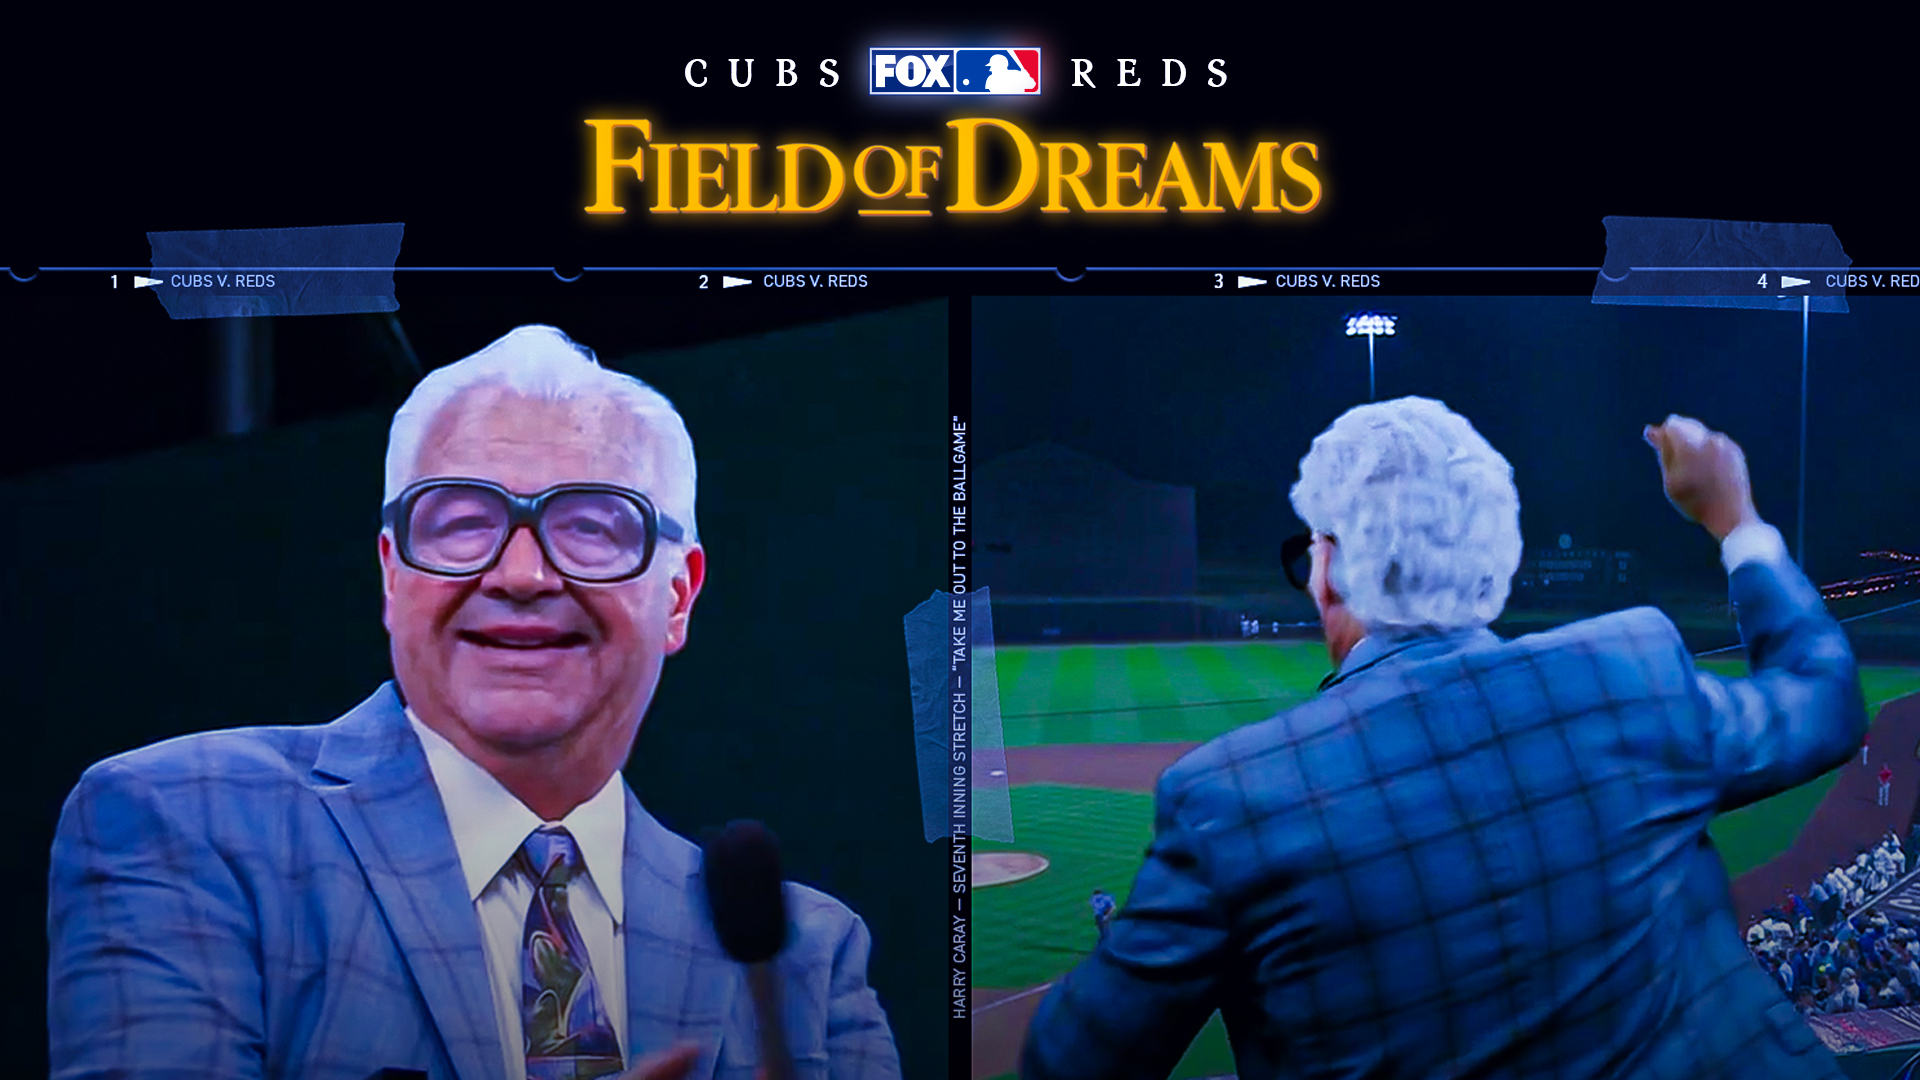 Field of Dreams game 2022 Cubs vs Reds: Final score and top